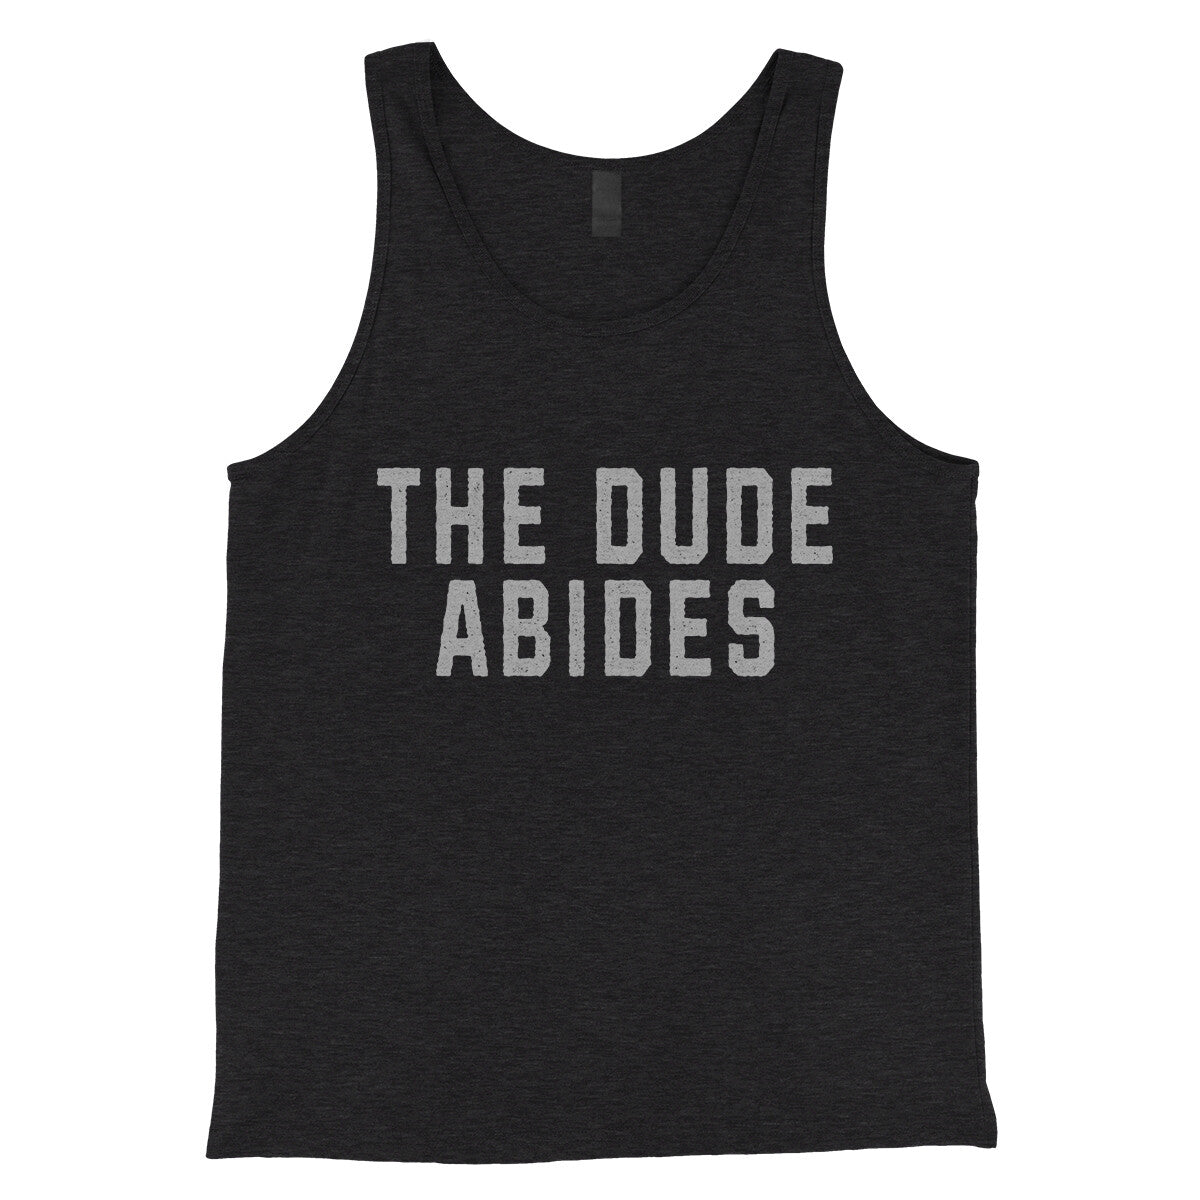 The Dude Abides in Charcoal Black TriBlend Color